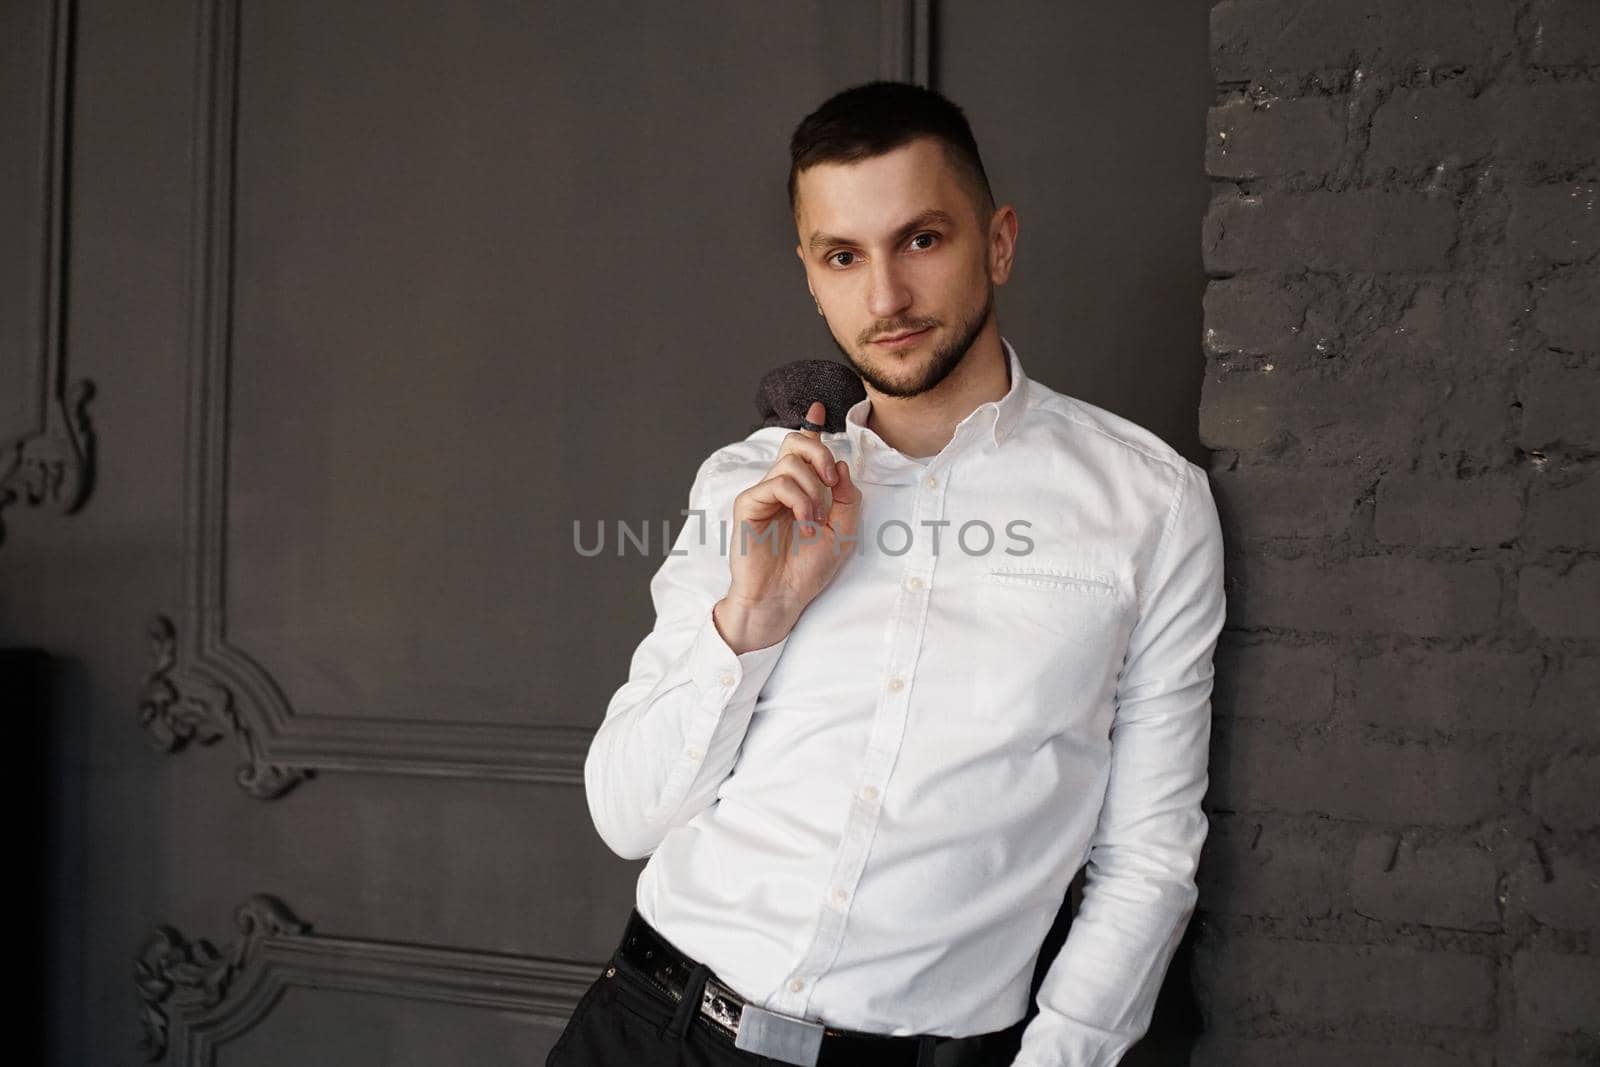 Stylish young businessman in white shirt is holding a jacket on finger, standing against brick wall